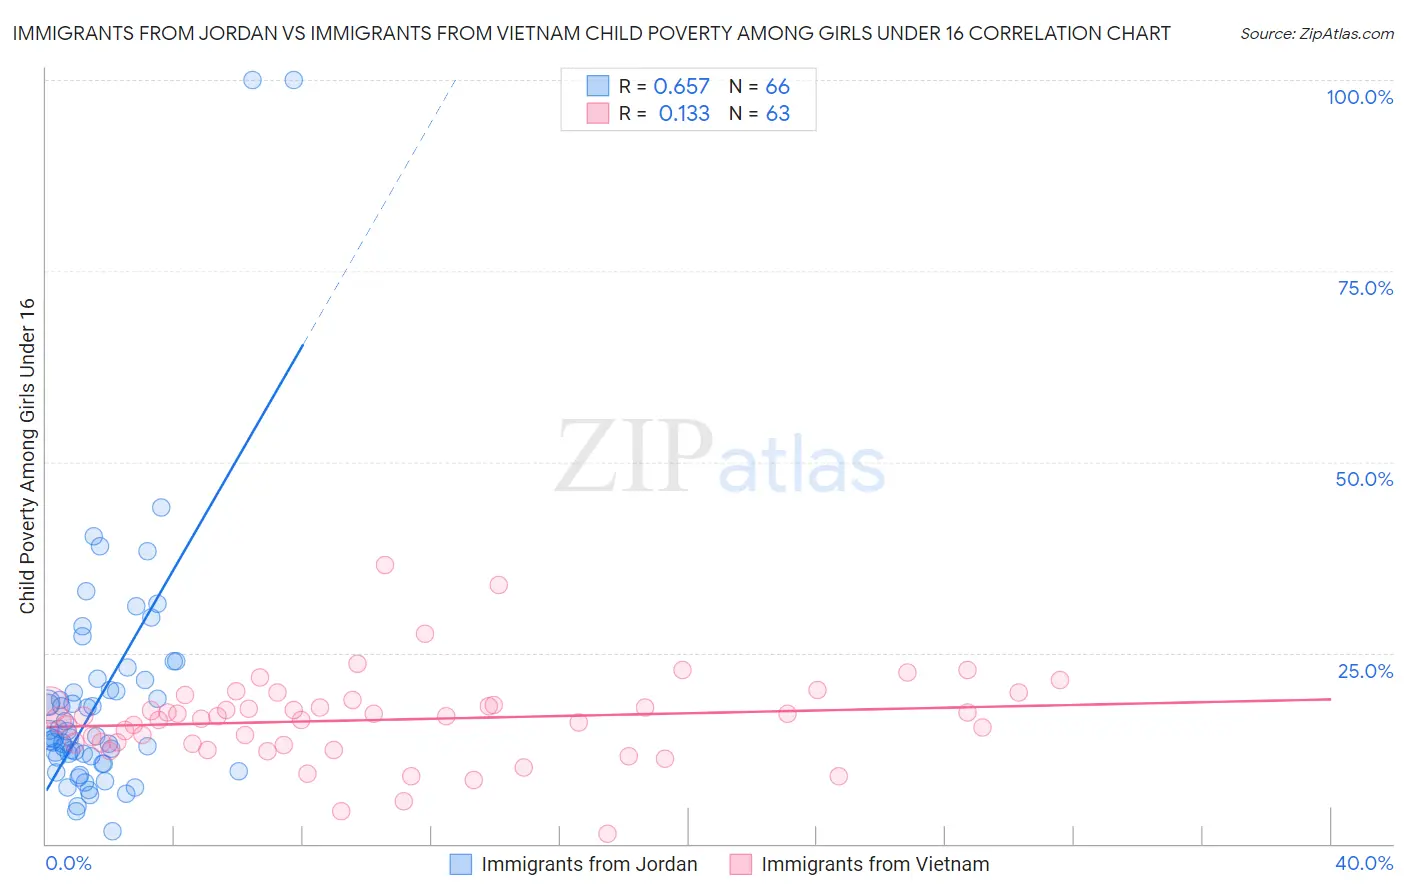 Immigrants from Jordan vs Immigrants from Vietnam Child Poverty Among Girls Under 16